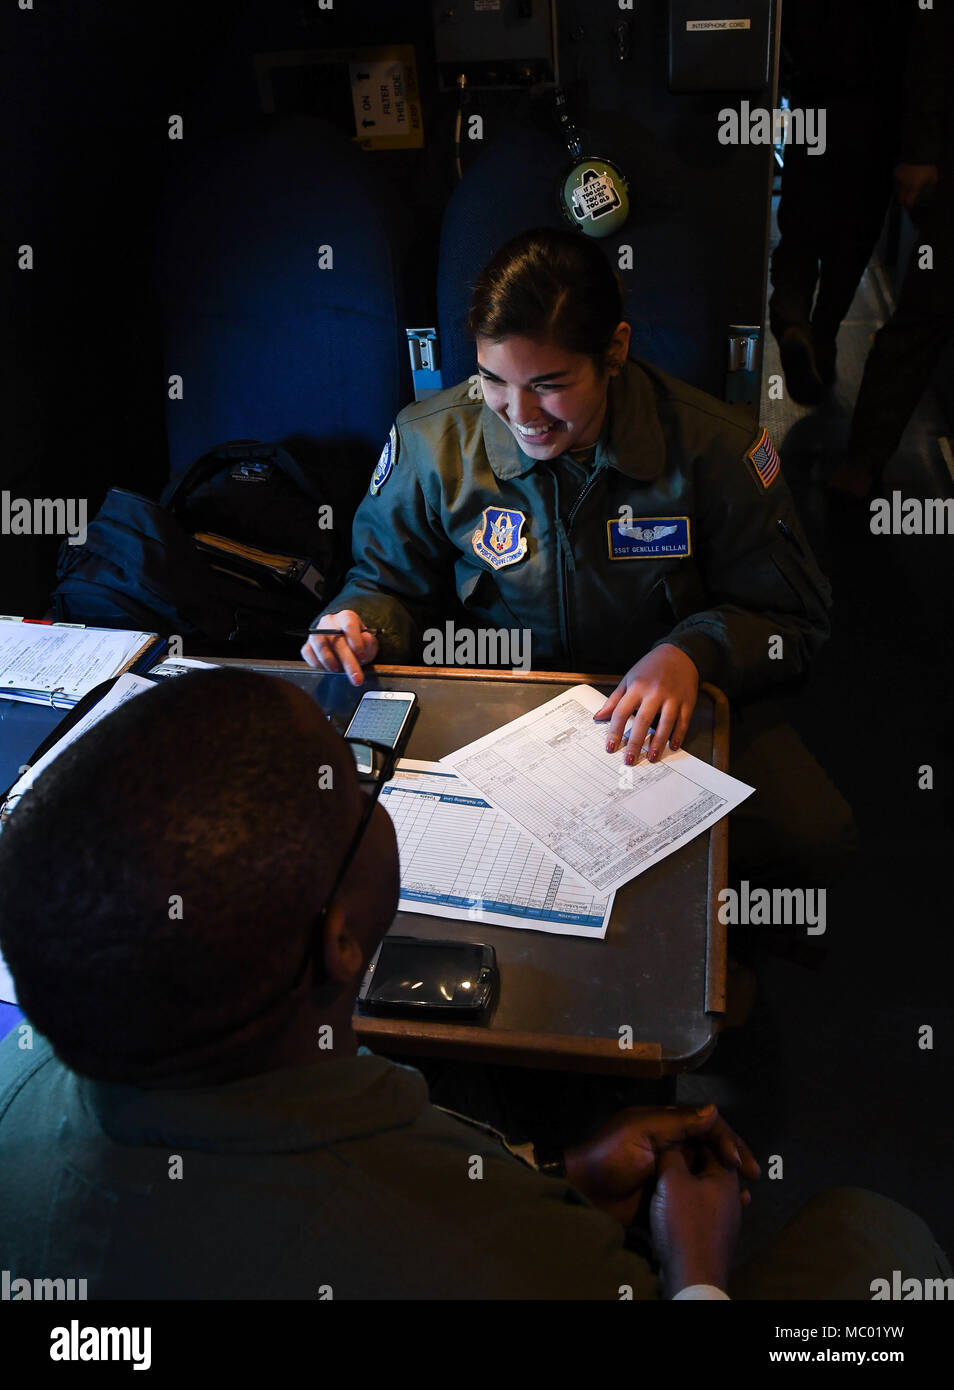 Staff Sgt. Genelle Bellar and Master Sgt. Leo C. Martin, 709th Airlift Squadron loadmasters, work to calculate the total weight of the C-5M Super Galaxy from Dover Air Force Base, Del., on the flightline at Barksdale Air Force Base, La., Jan. 12, 2018. The total weight of the aircraft is needed to determine the speed in which the aircraft must be at to properly take off. (U.S. Air Force photo by Airman 1st Class Tessa B. Corrick) Stock Photo